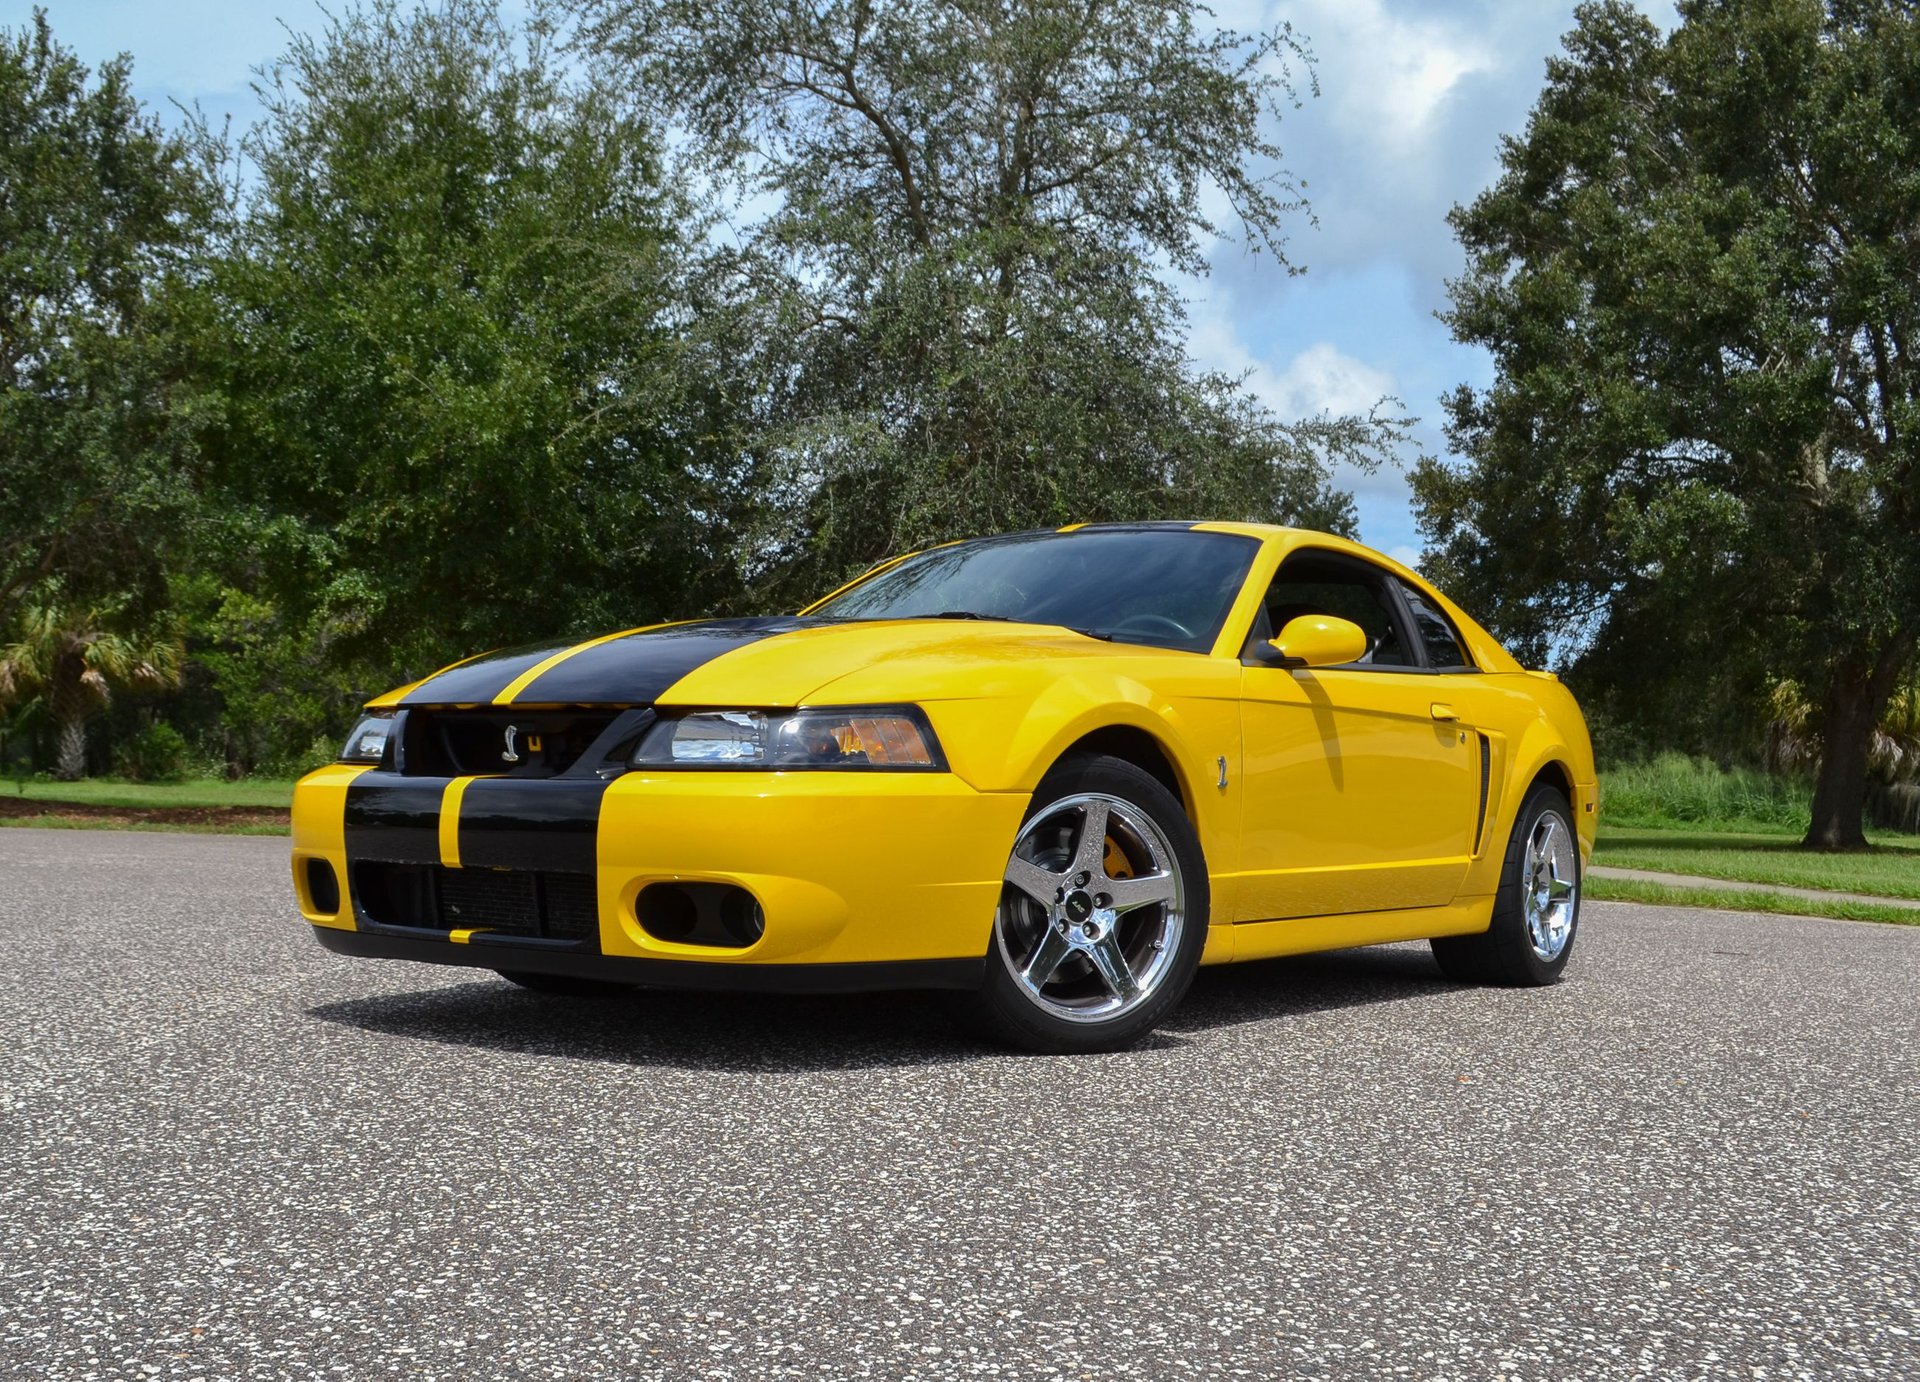 2004 Ford Mustang | PJ's Auto World Classic Cars for Sale